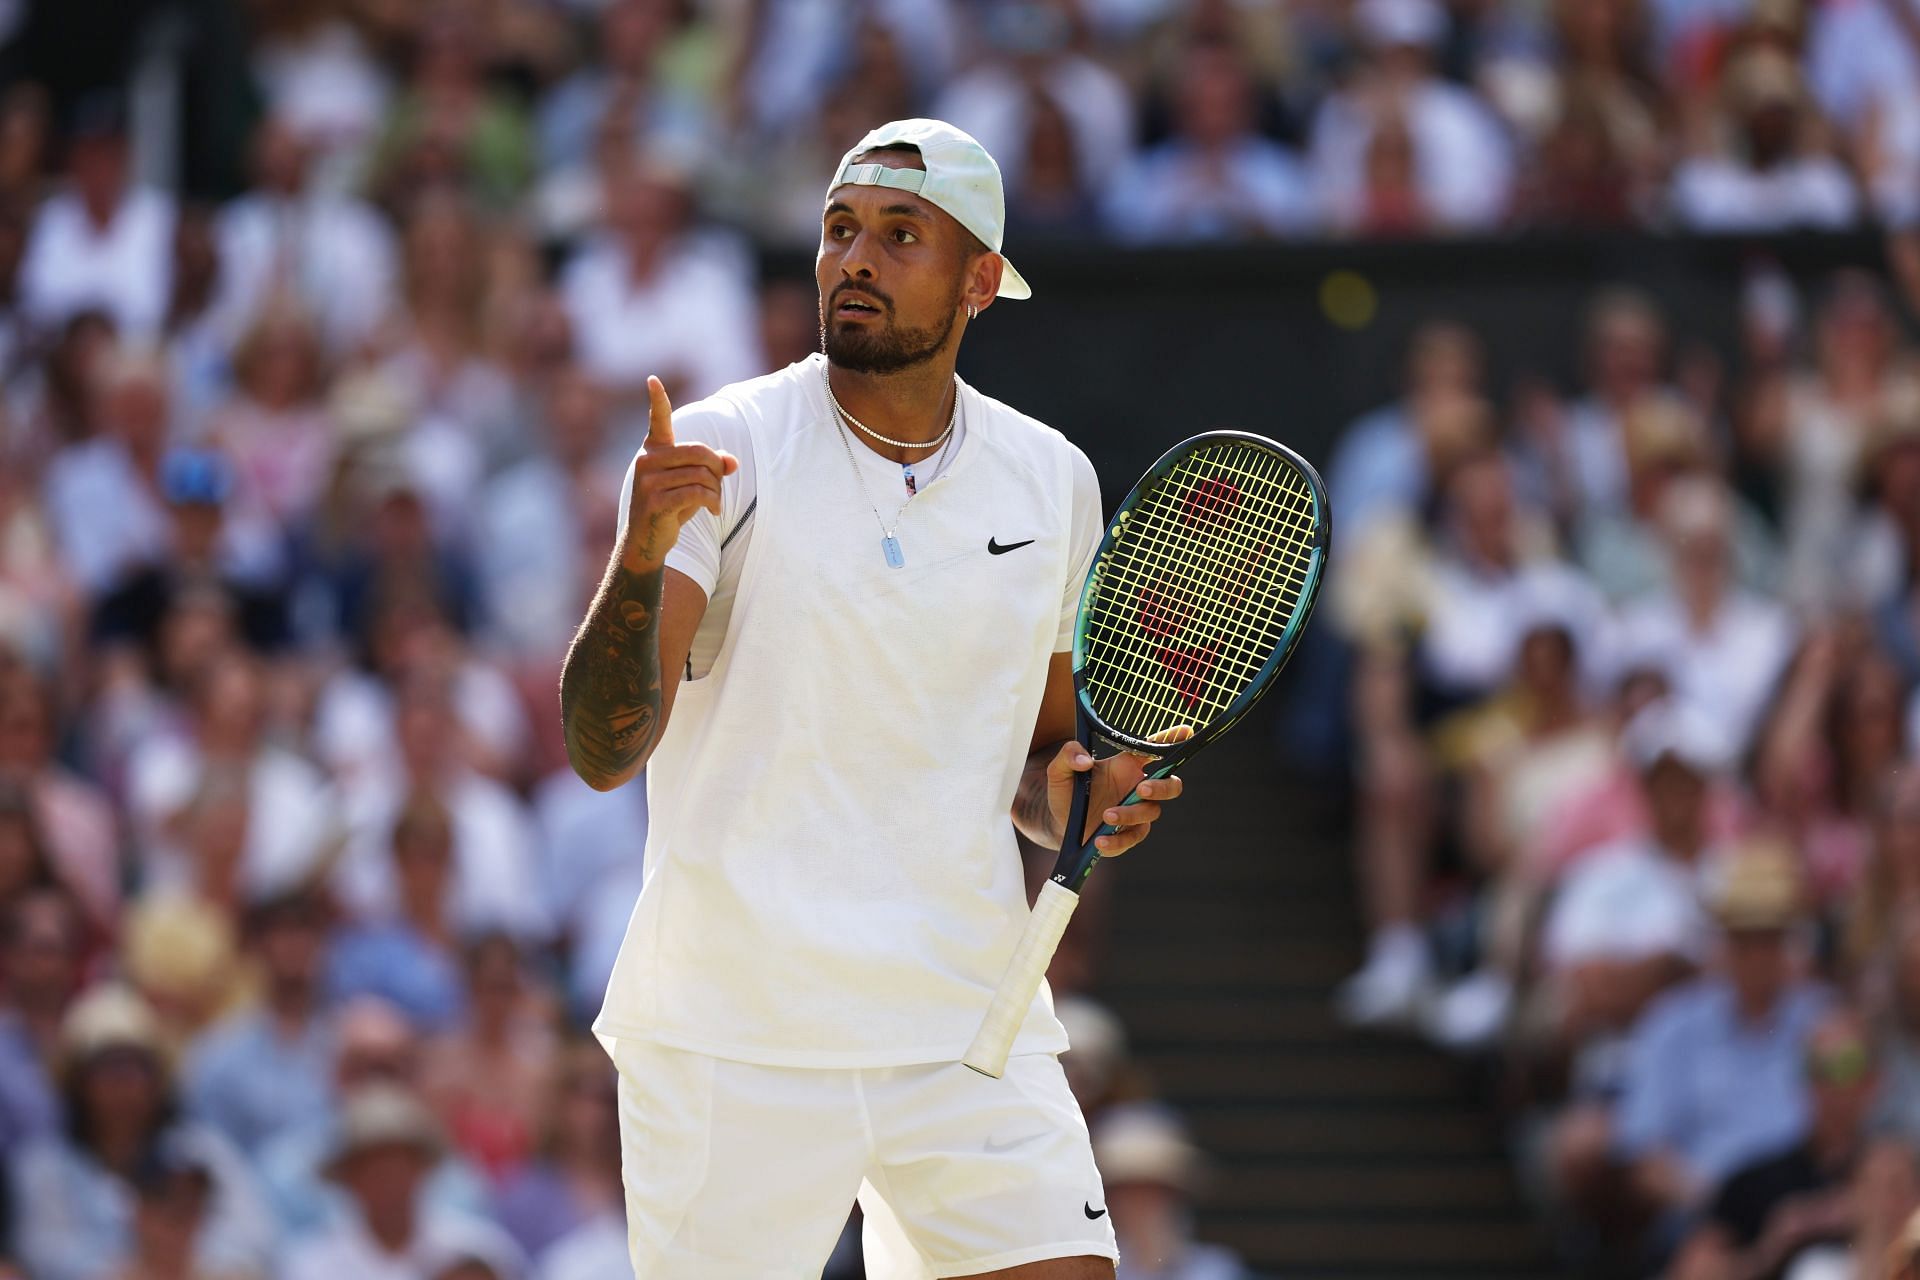 Nick Kyrgios is a first-time Grand Slam finalist at Wimbledon 2022.